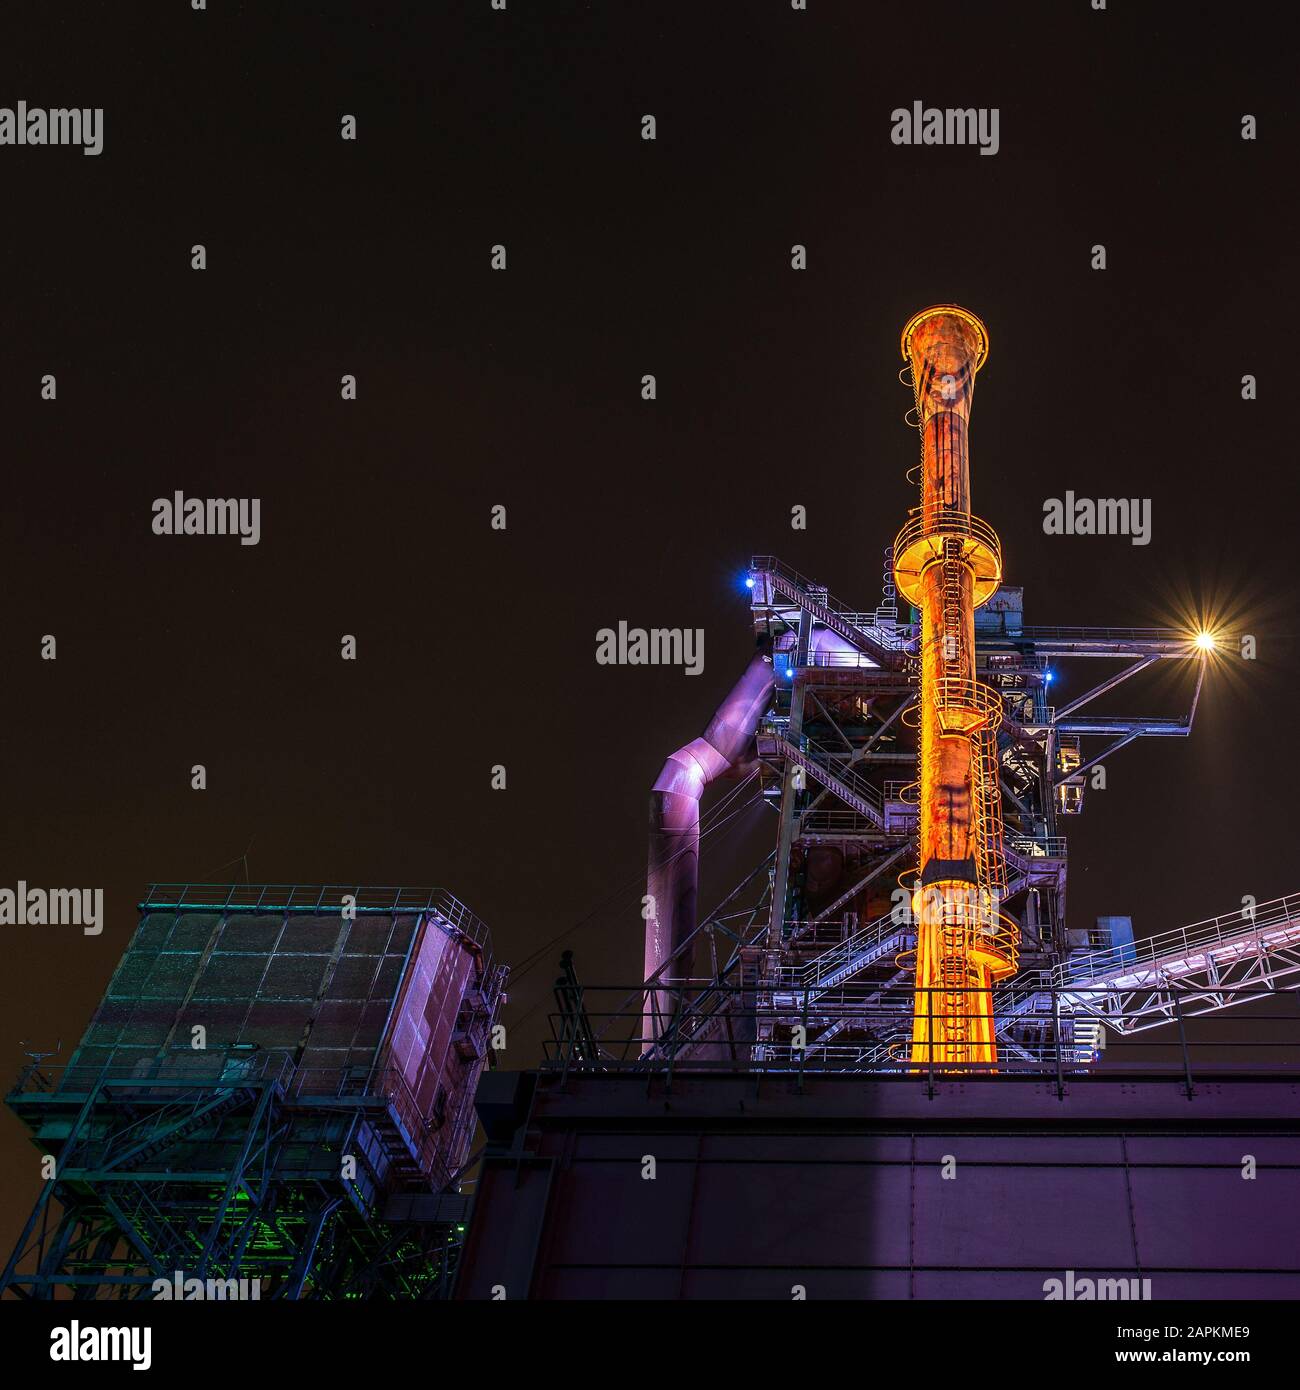 Amazing low angle shot of a building and tower with colorful lights at night Stock Photo